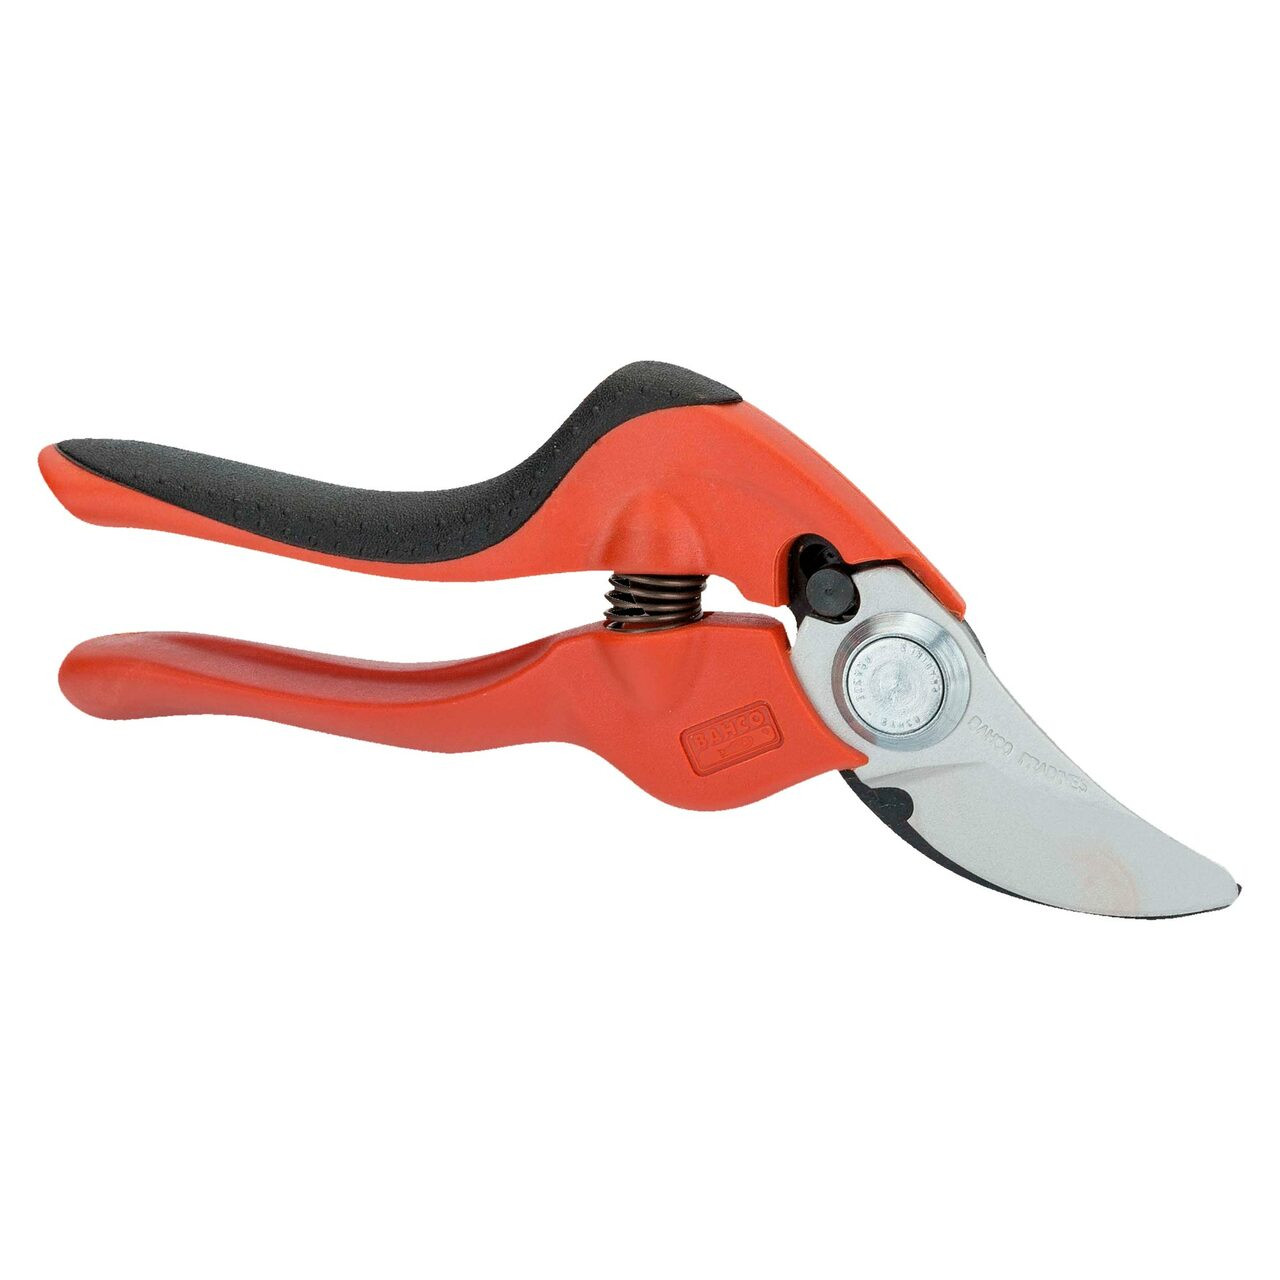 Bahco PG-L2-F Bypass Secateurs Large 20mm Capacity